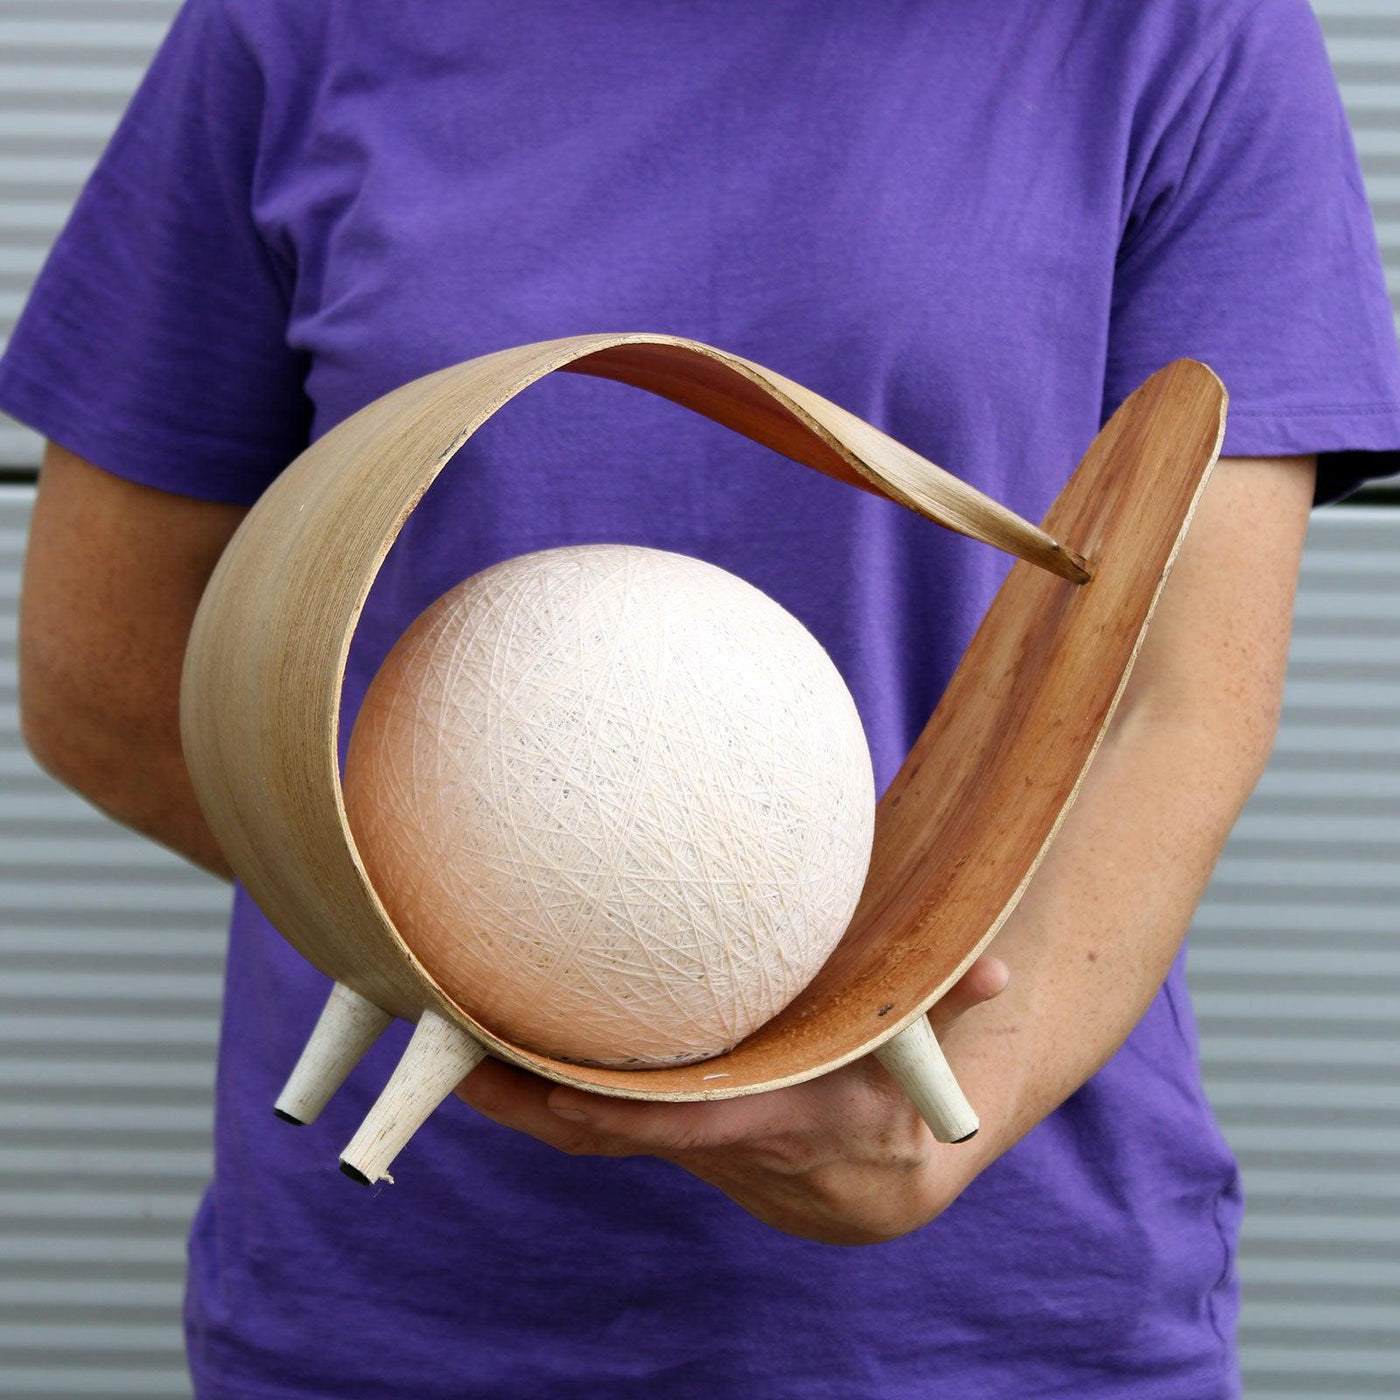 Natural Coconut Table Lamp - Natural Wrapover.